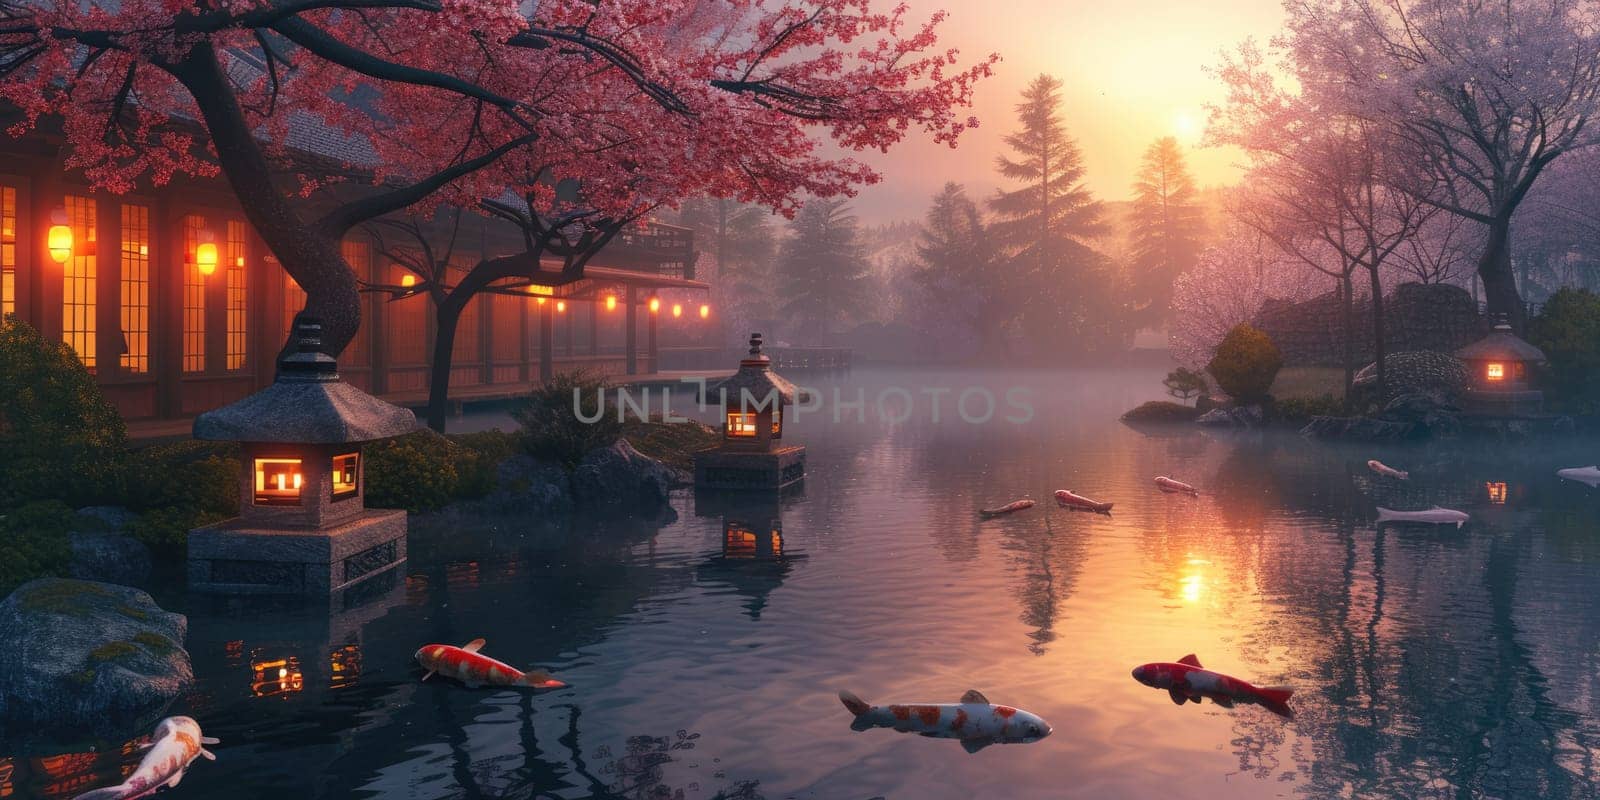 Sunset Glow at a Peaceful Japanese Pavilion by a Koi Pond. Resplendent. by biancoblue